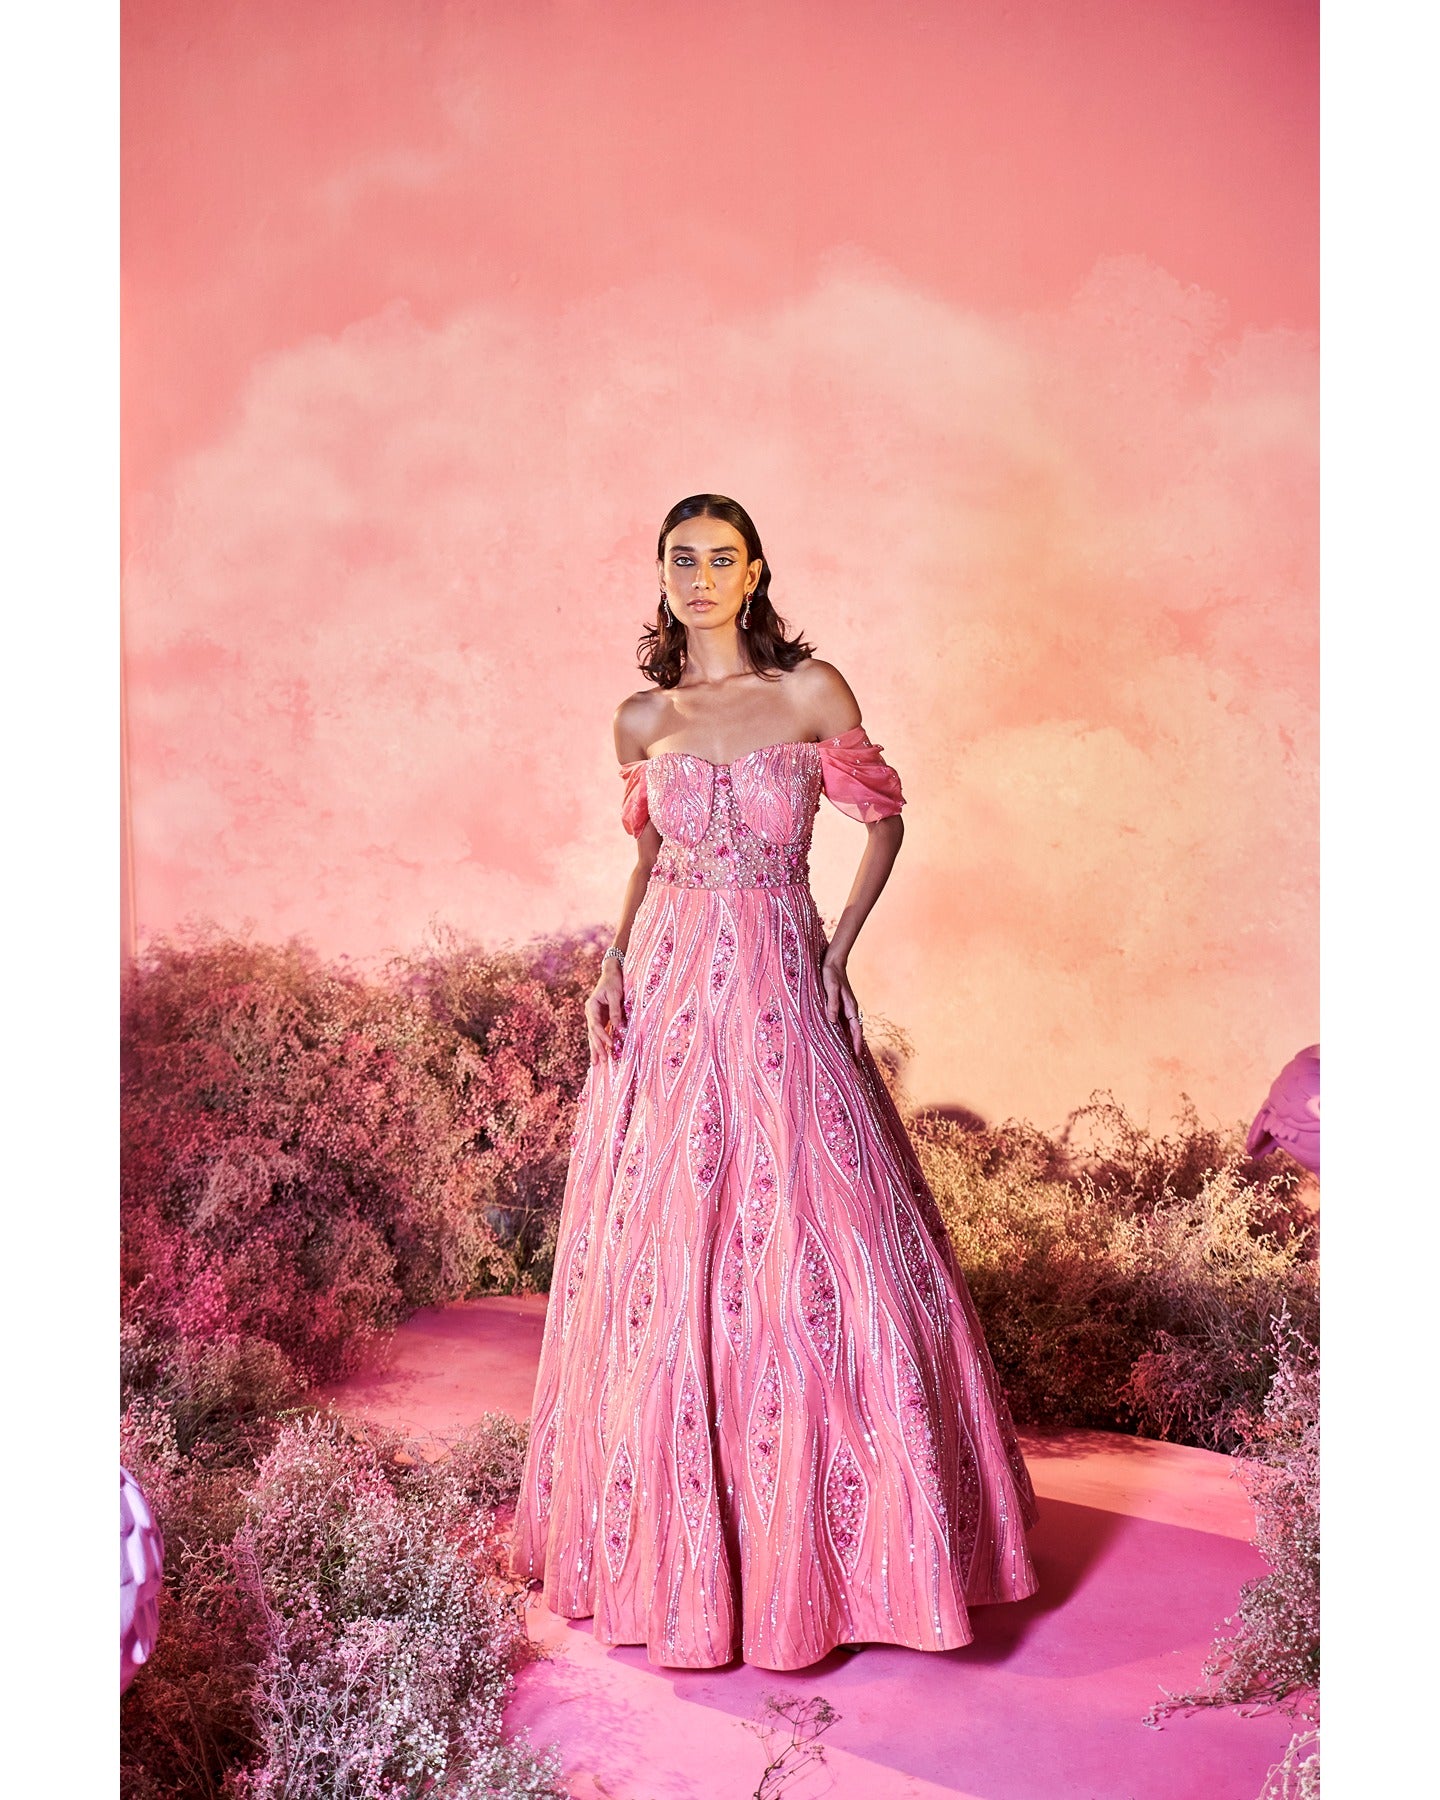 In the spotlight: Dazzling in bright pink, this hand-embroidered gown is a masterpiece of elegance and craftsmanship.